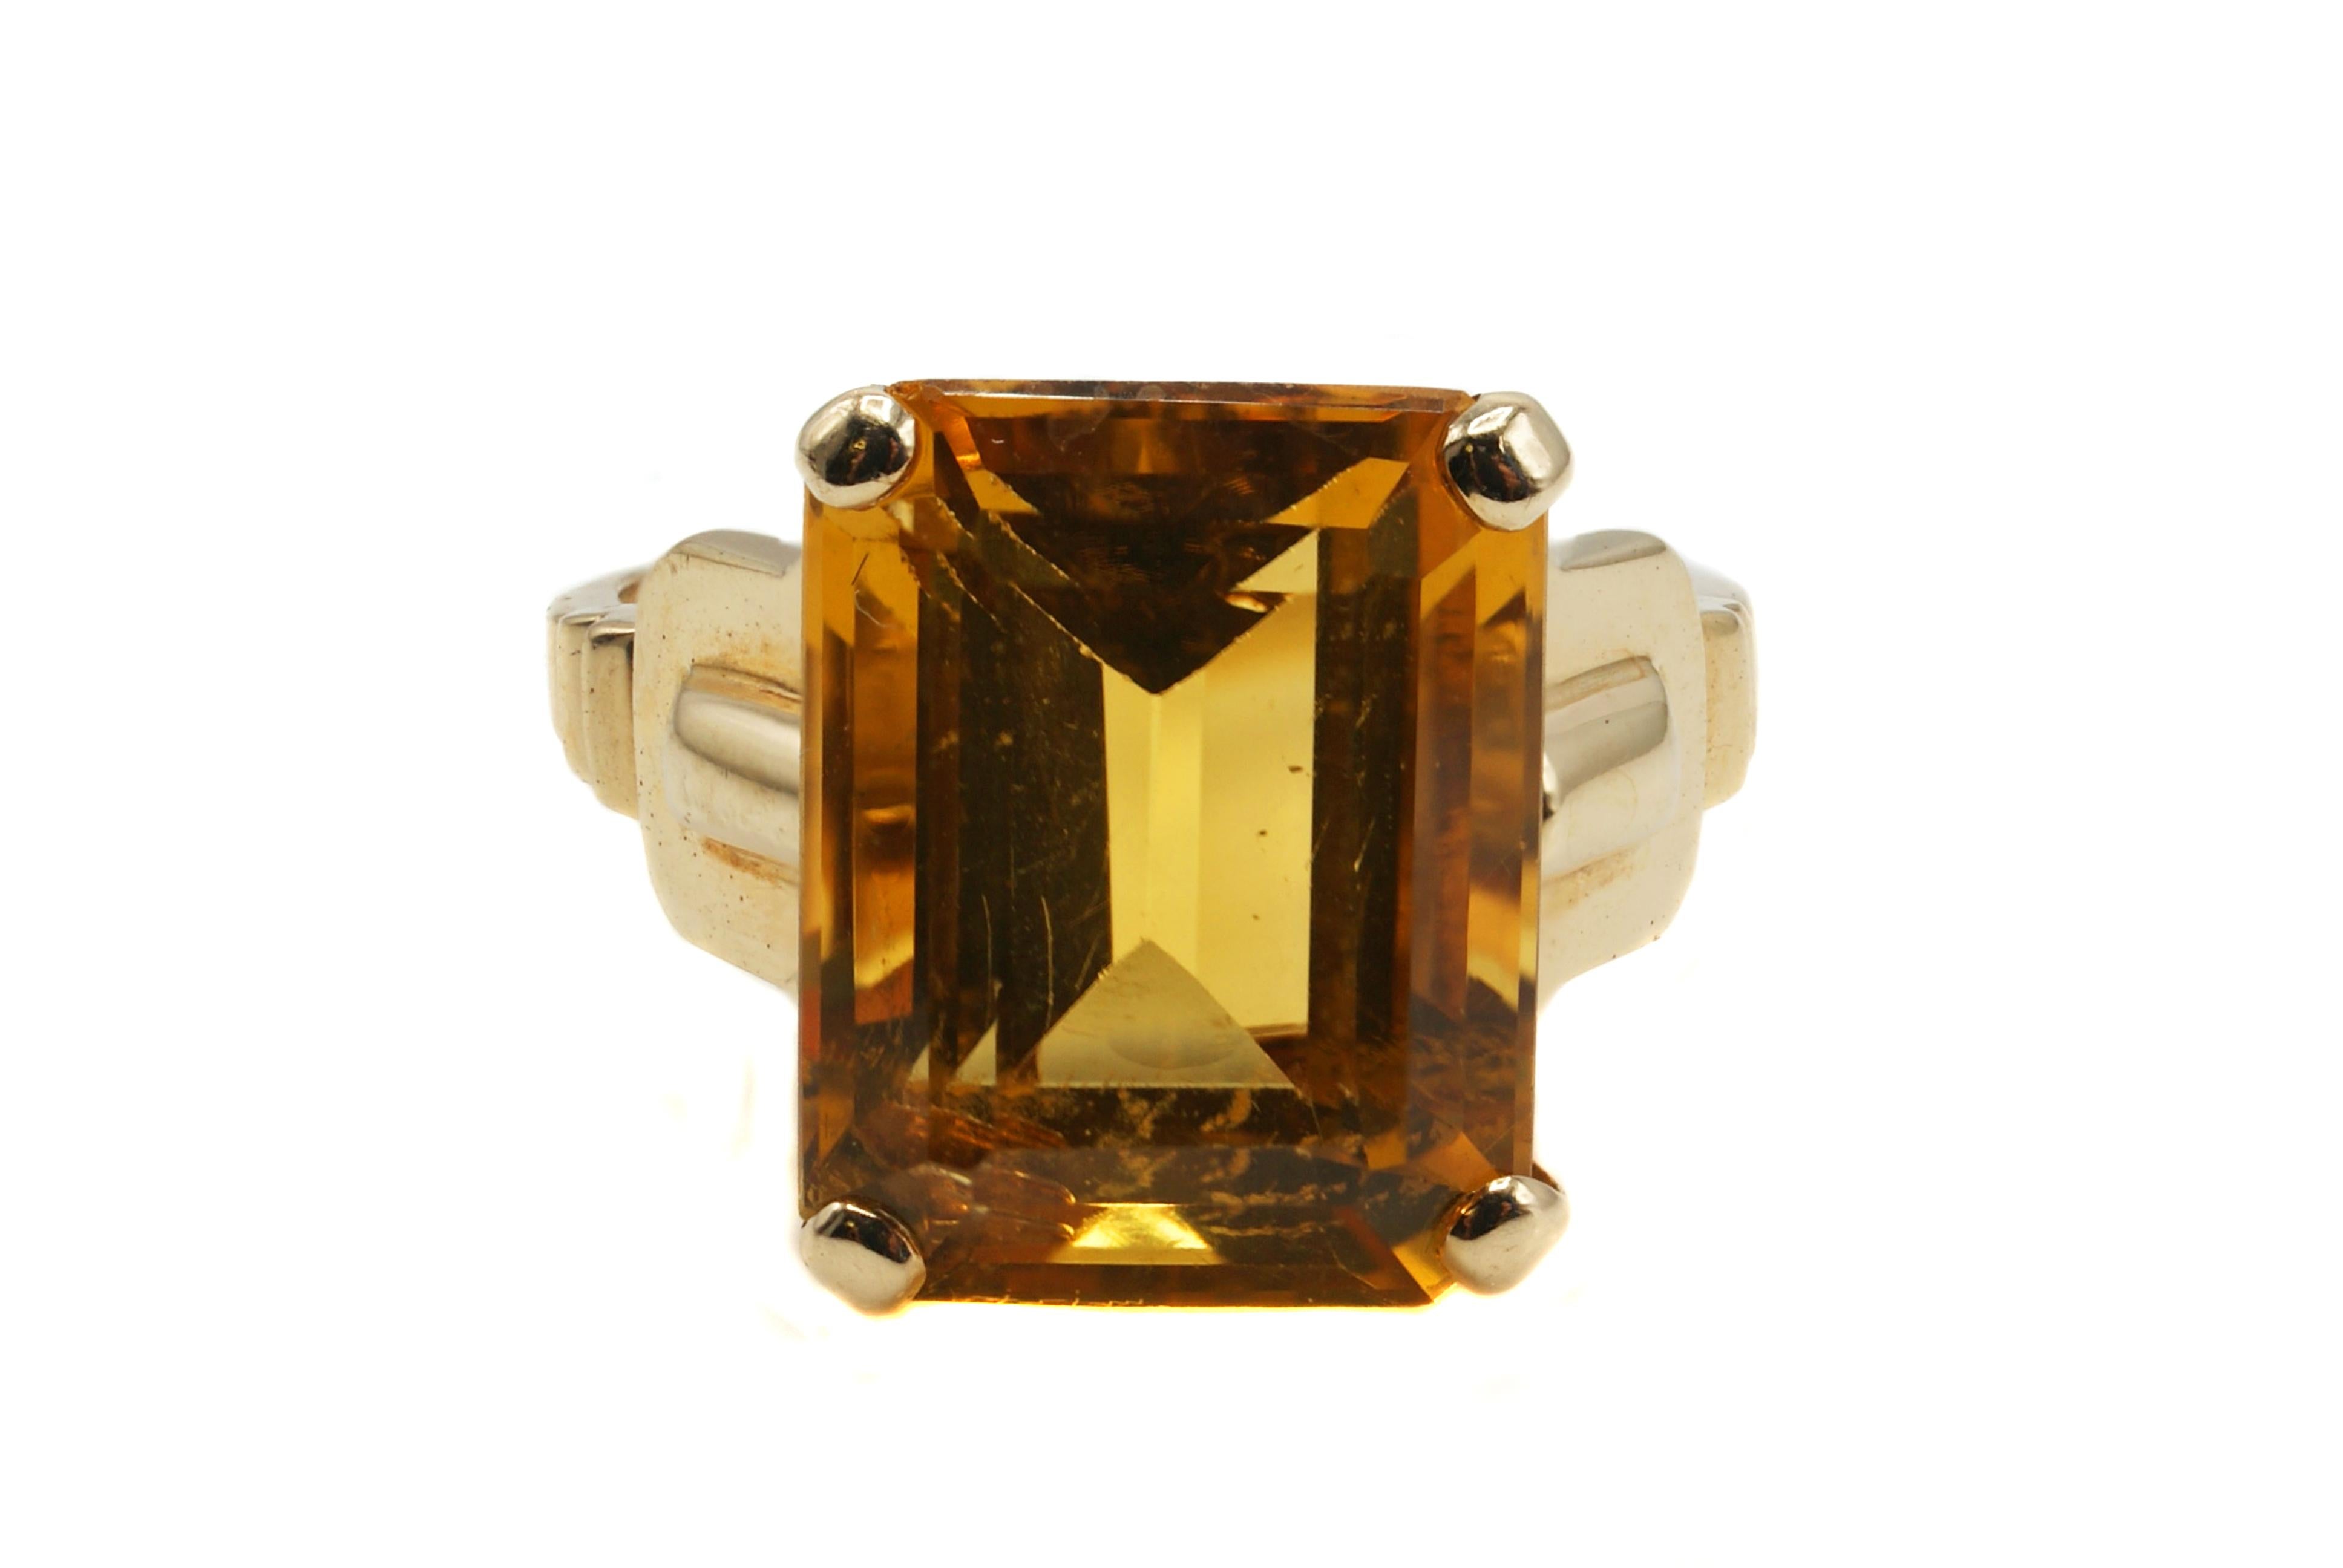 Stunning bright orange emerald cut citrine retro ring by Tiffany & co. set in a handcrafted 14 karat yellow gold mounting. The beautiful saturated orange color of this well cut citrine is complimented by just the right tone of the yellow gold to